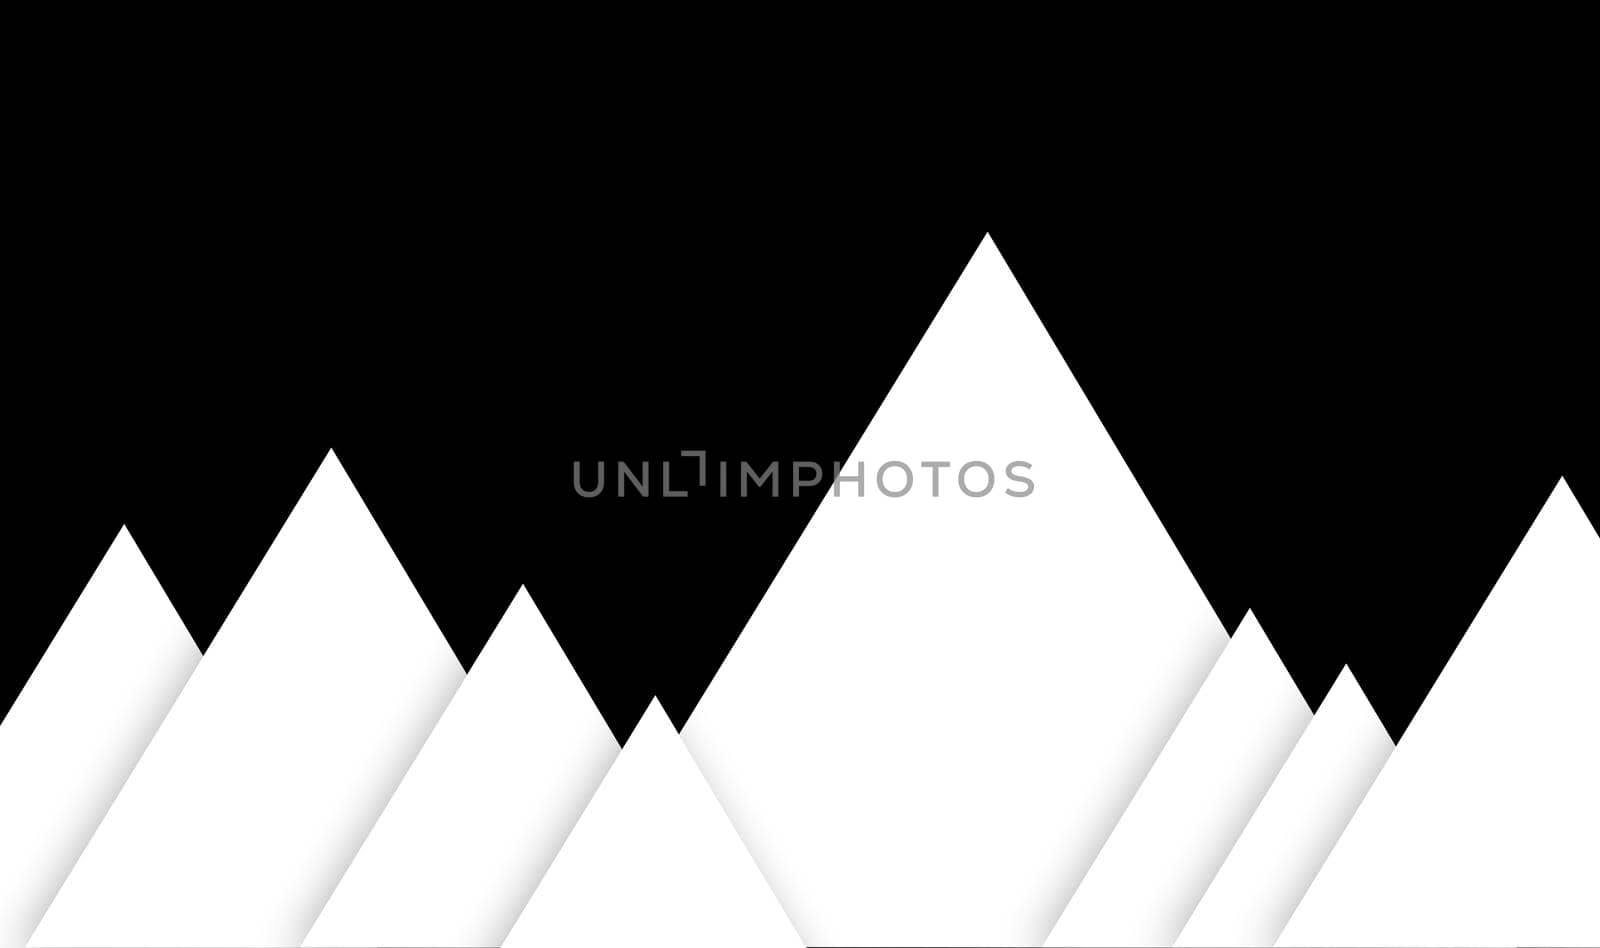 Basic zig-zag made of shapes (mountain ) stock photoBlack Background, Mountain Peak, Abstract, At The Edge Of, Backgrounds by tabishere